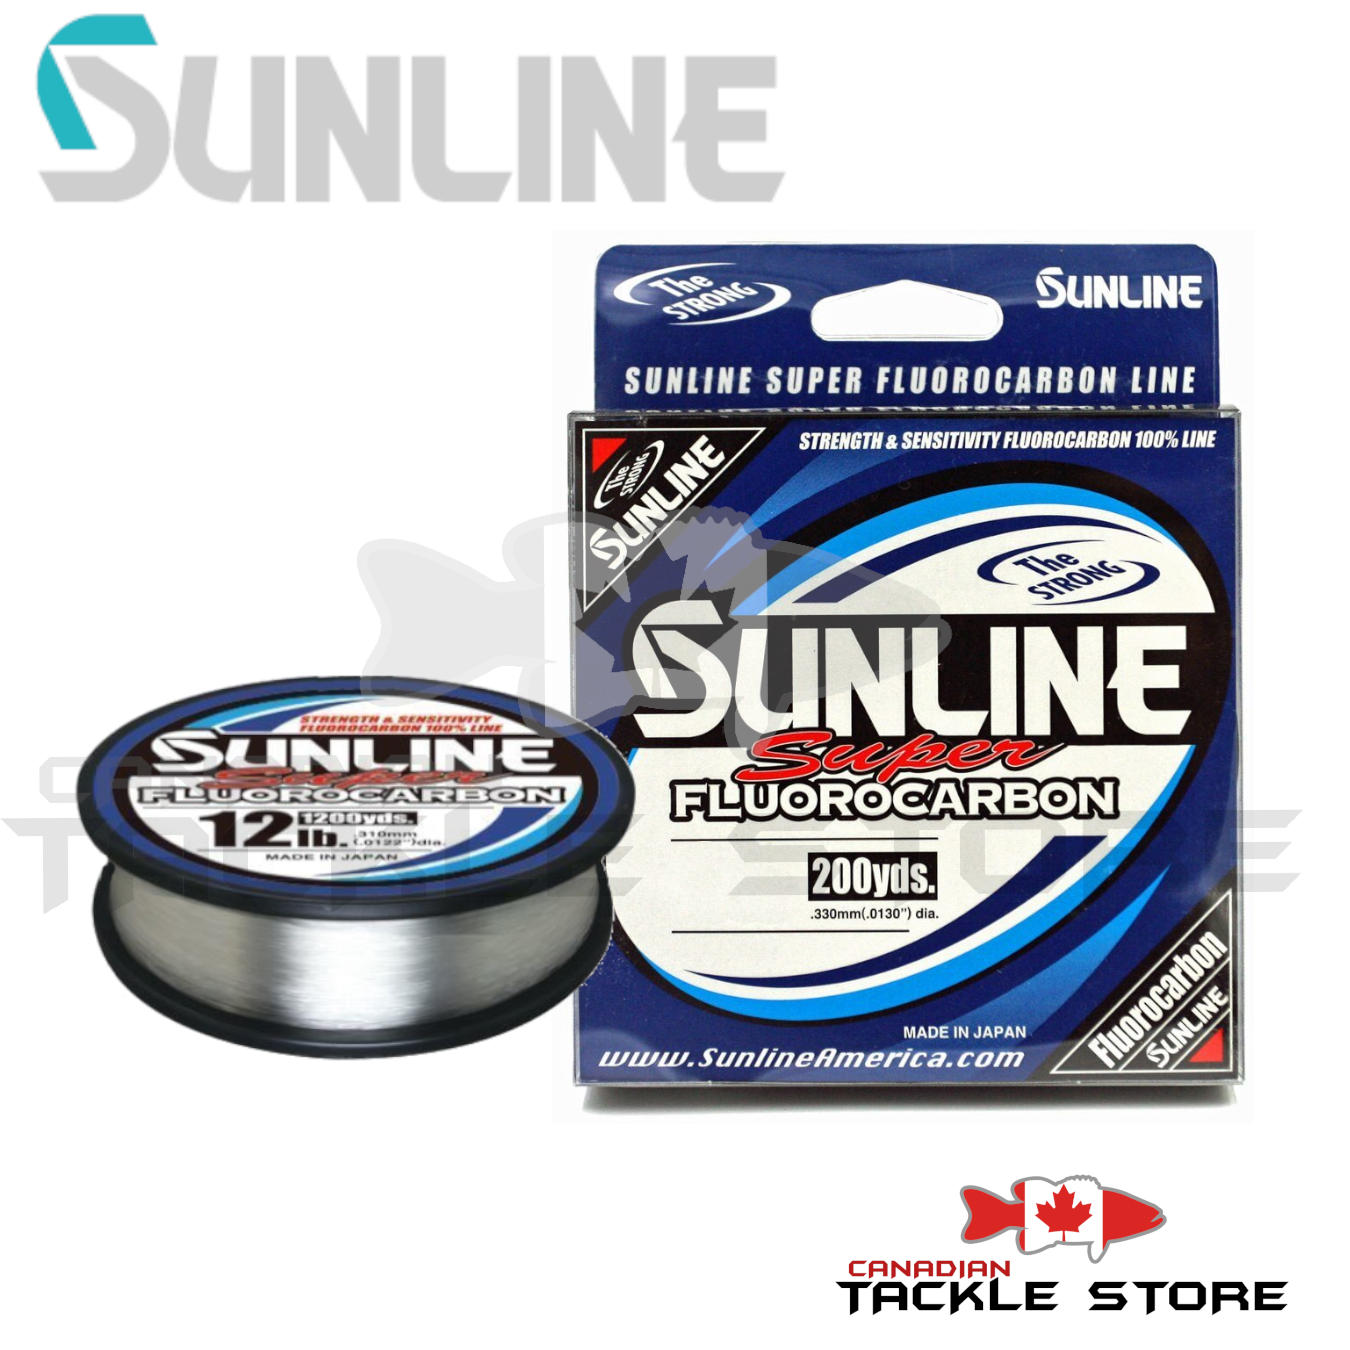 Sunline – Canadian Tackle Store